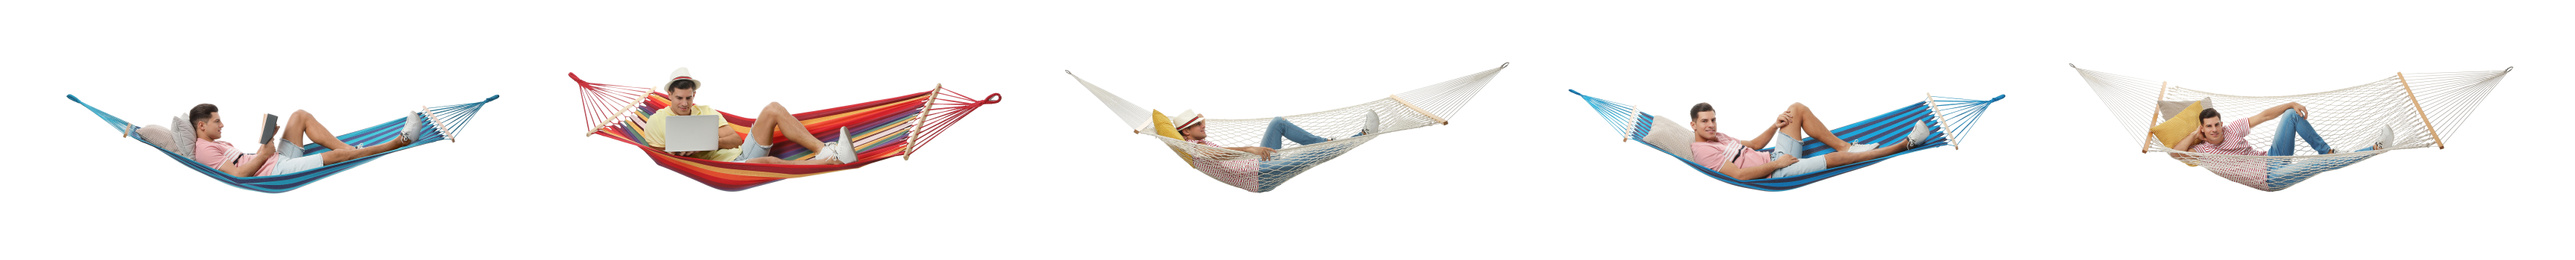 Image of Collage with man resting in different hammocks on white background. Banner design